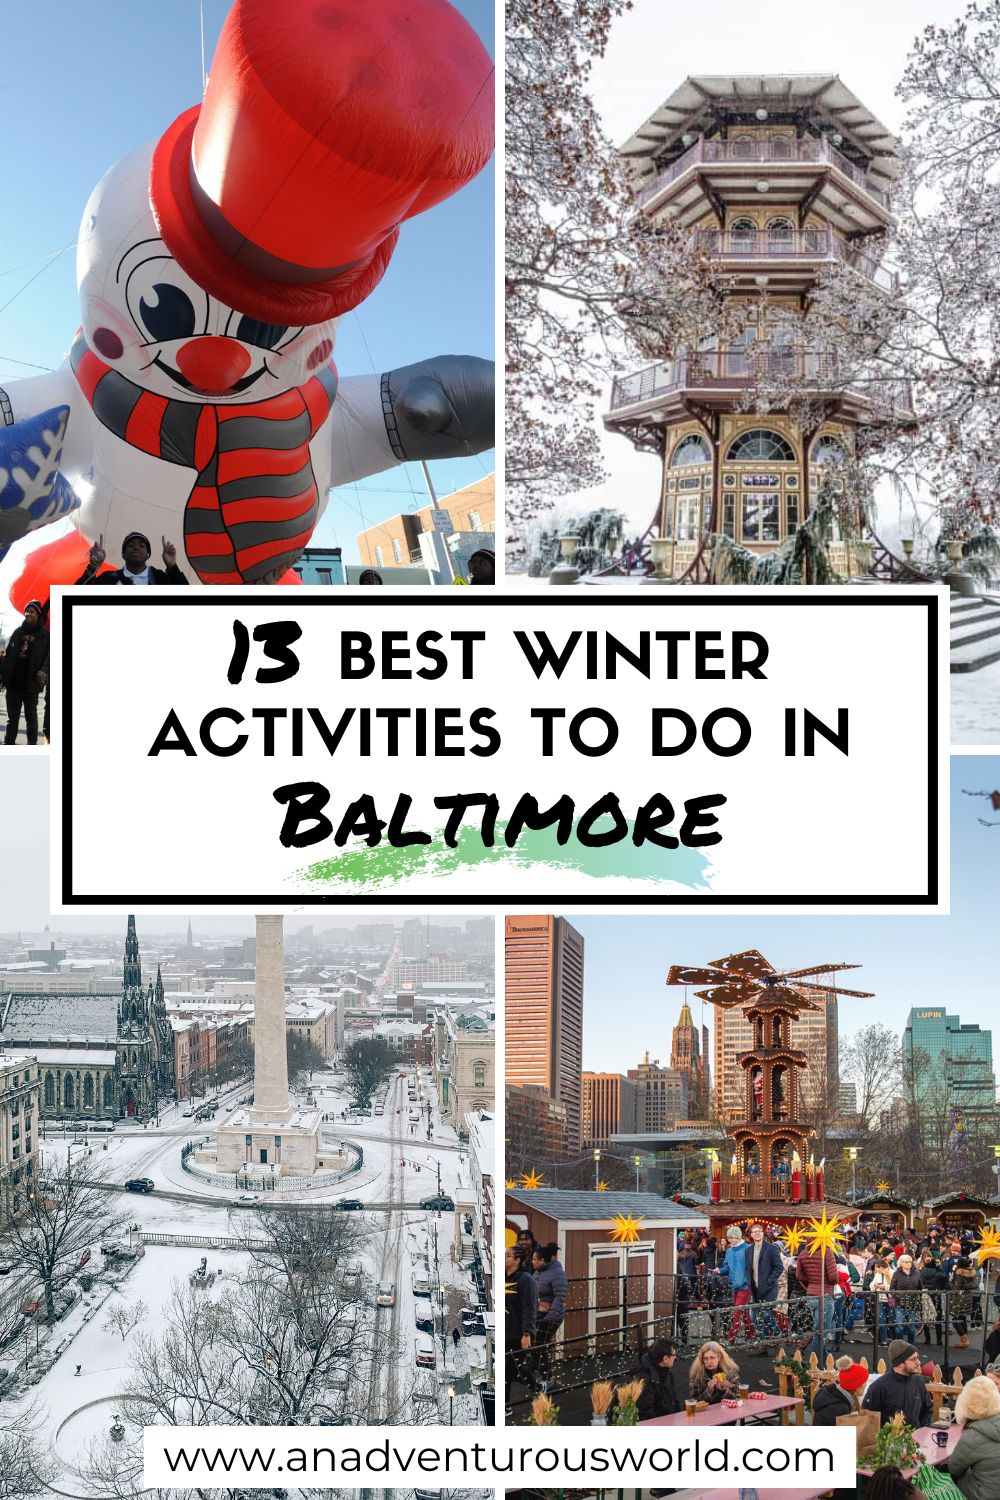 13 BEST Things to do in Baltimore in Winter